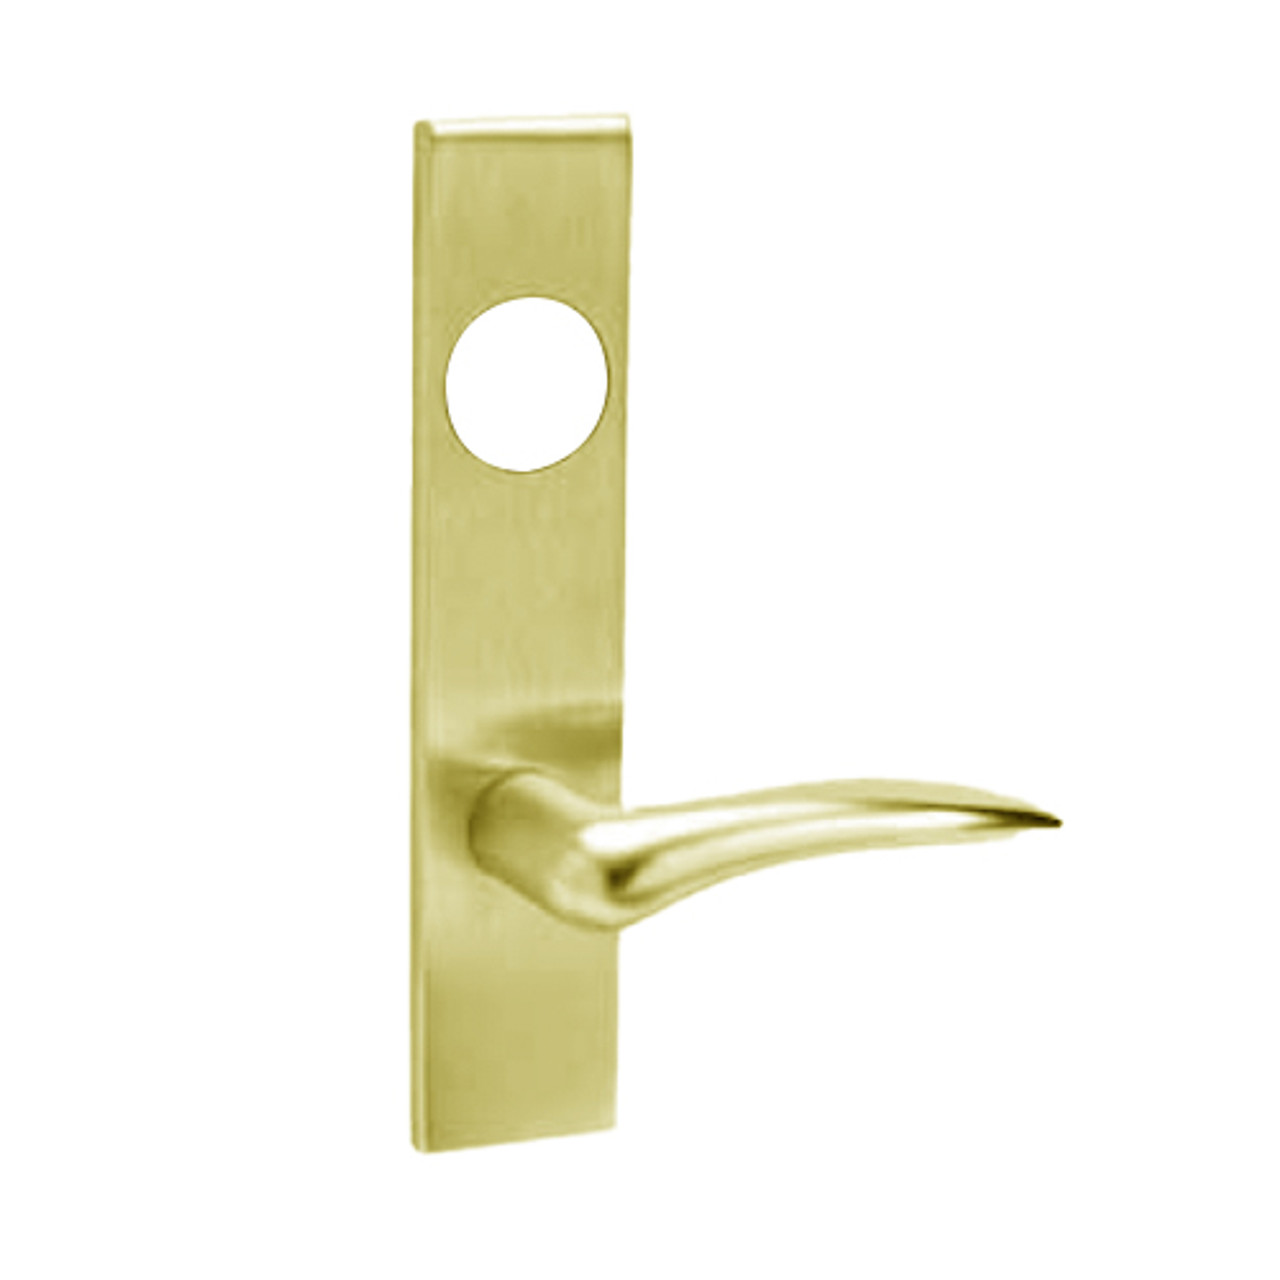 ML2029-DSR-605-LH-M31 Corbin Russwin ML2000 Series Mortise Hotel Trim Pack with Dirke Lever and Deadbolt in Bright Brass